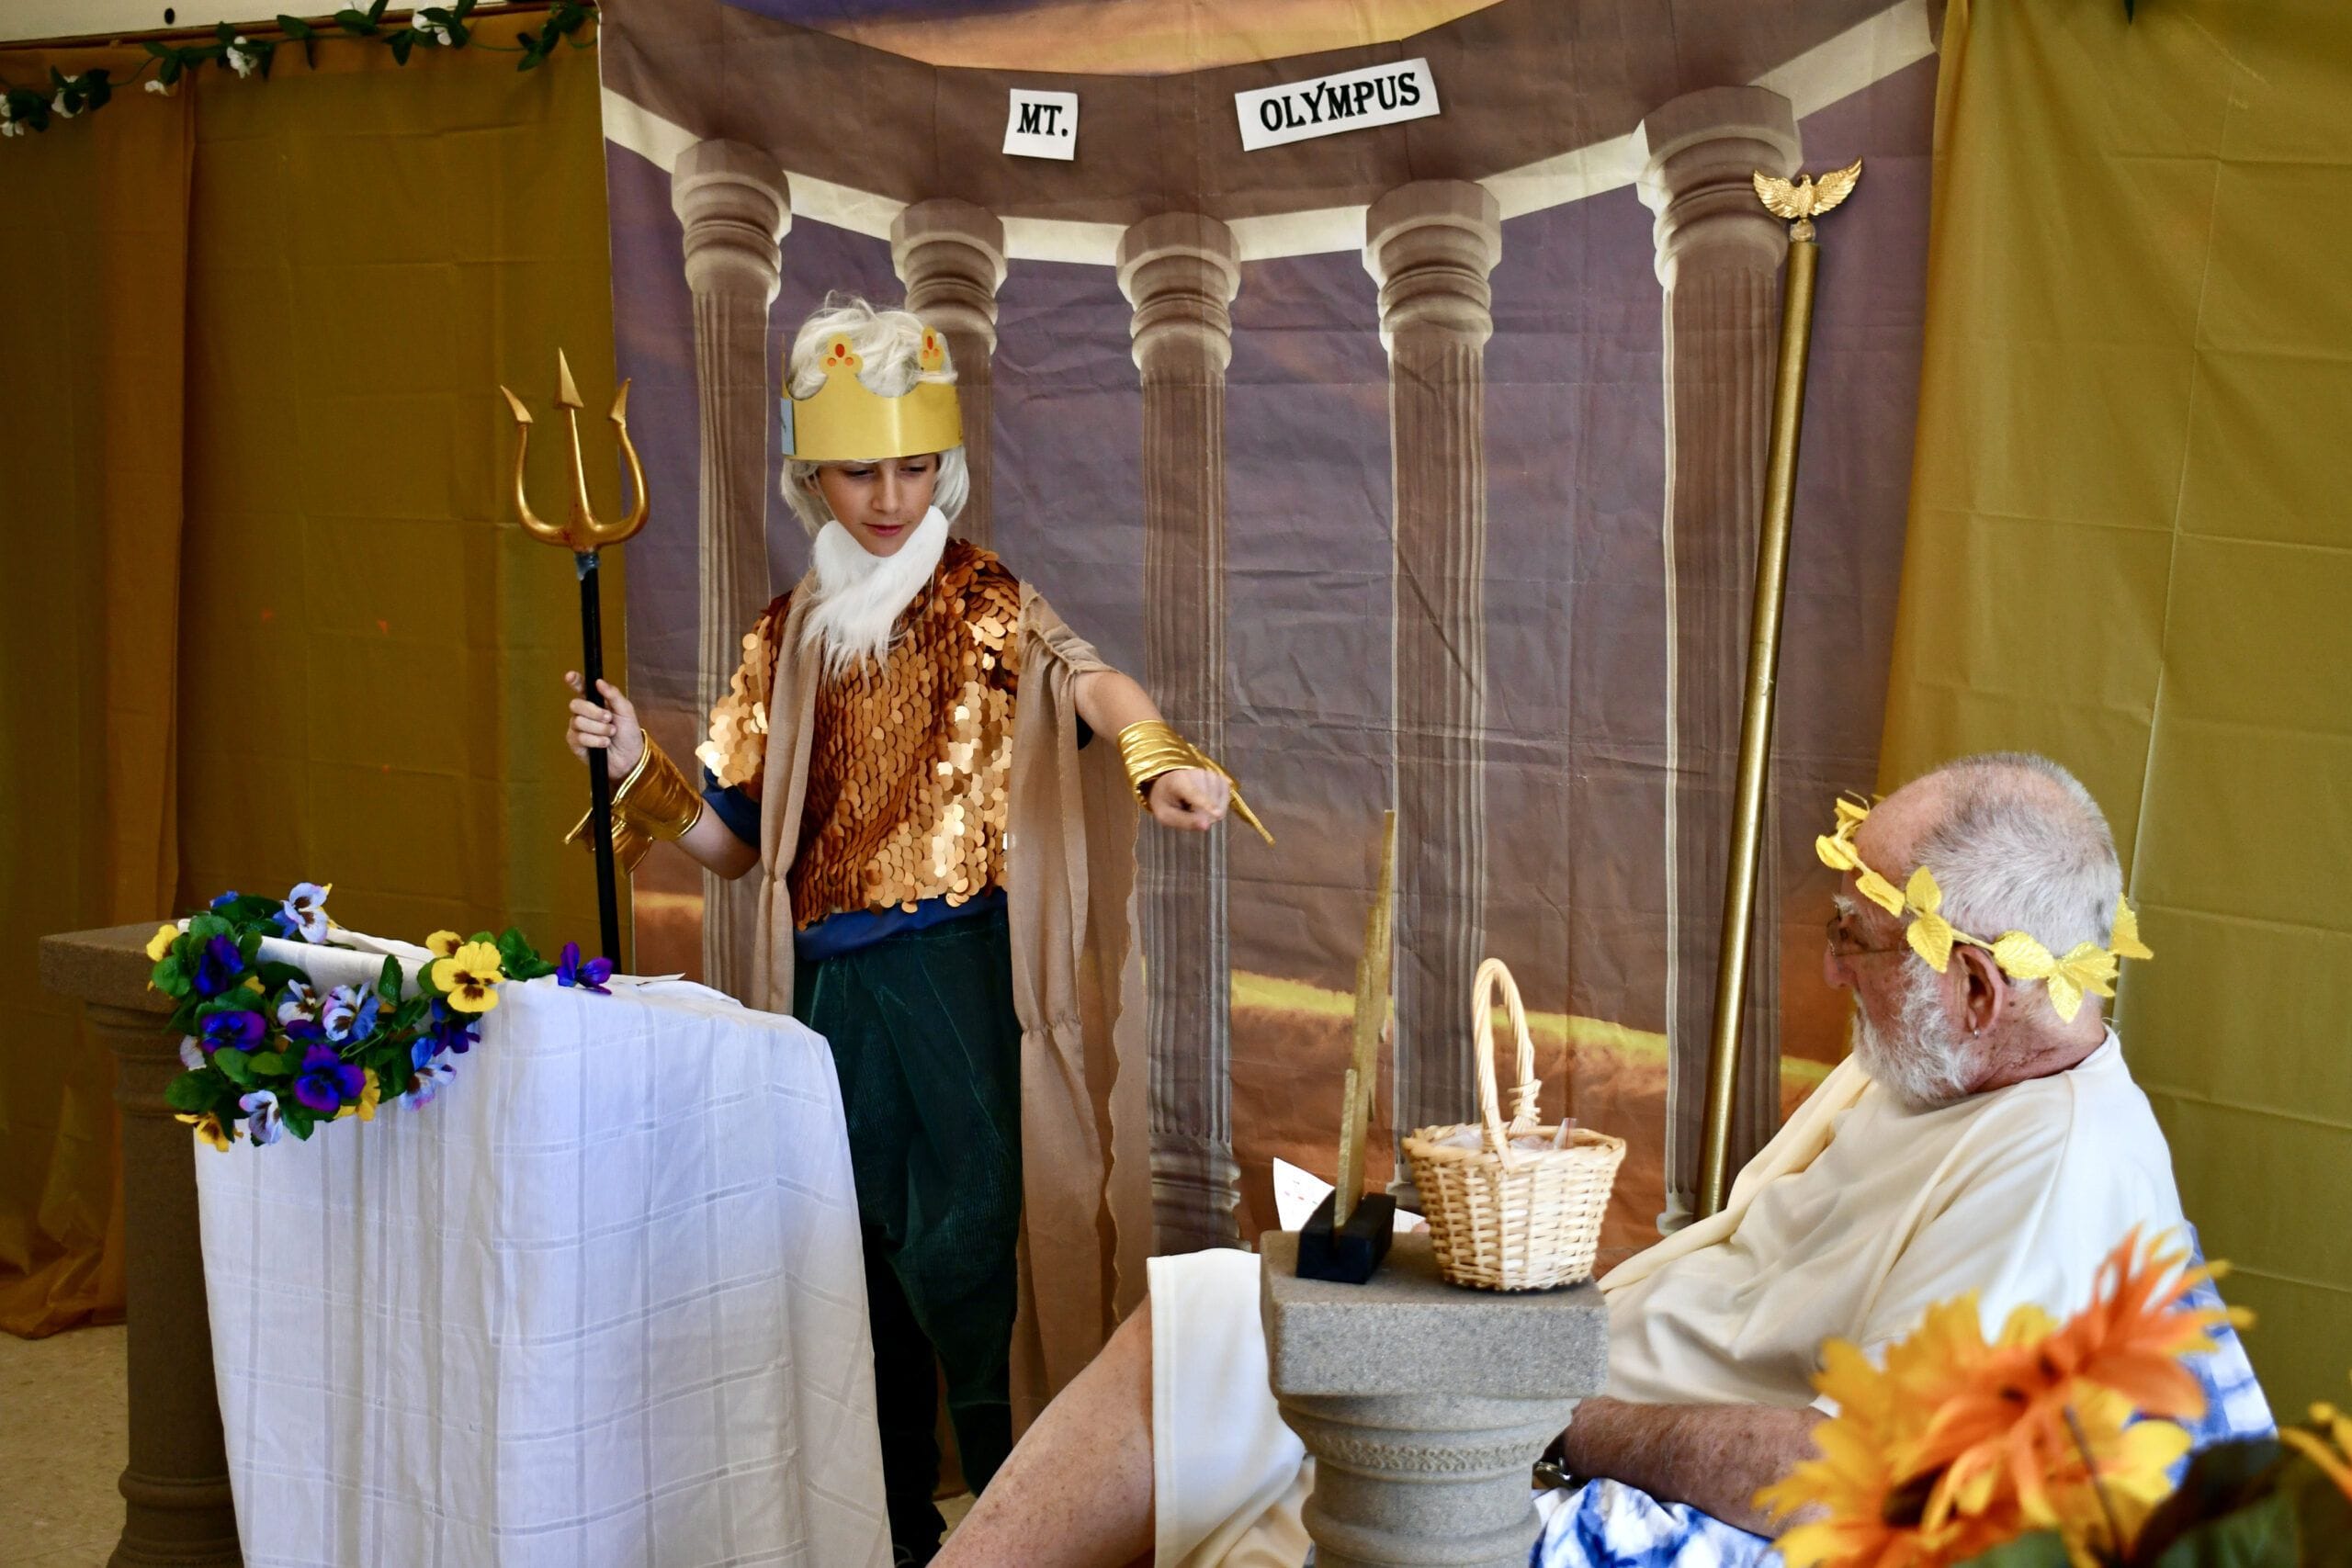 Greek Mythology Comes To Life At Bethpage’s John F. Kennedy Middle School